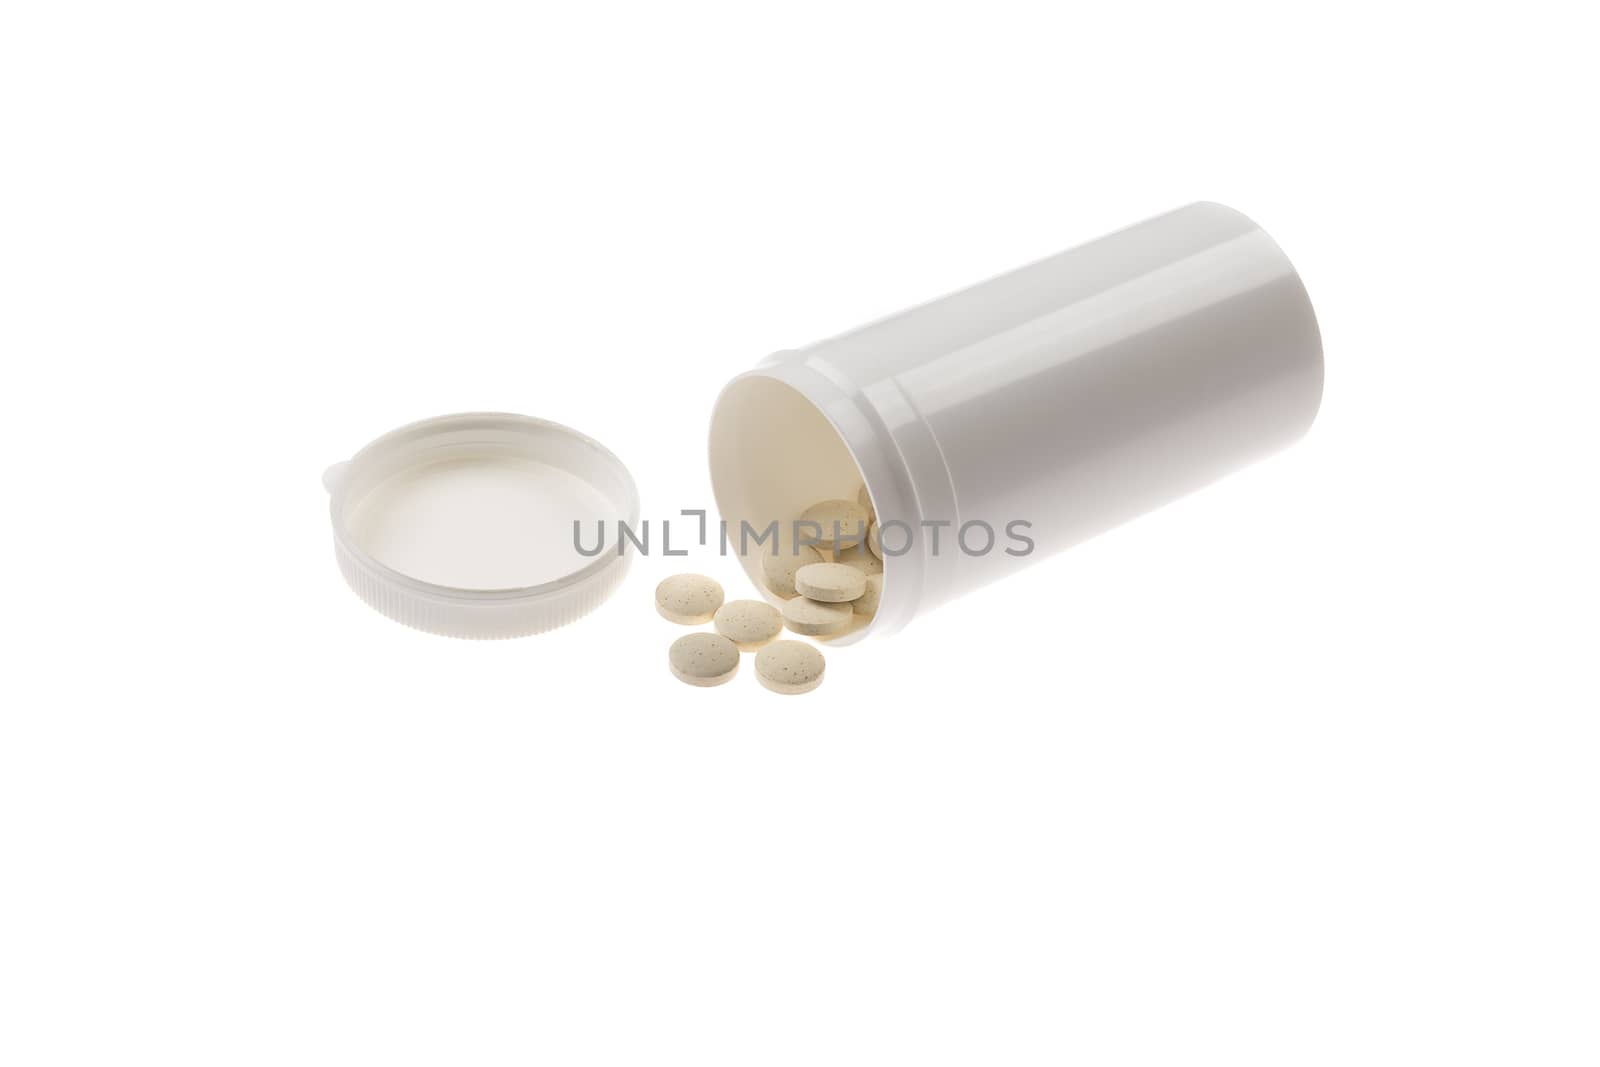 pills spilled from pills bottle. Pills and medicine container lying on white background.